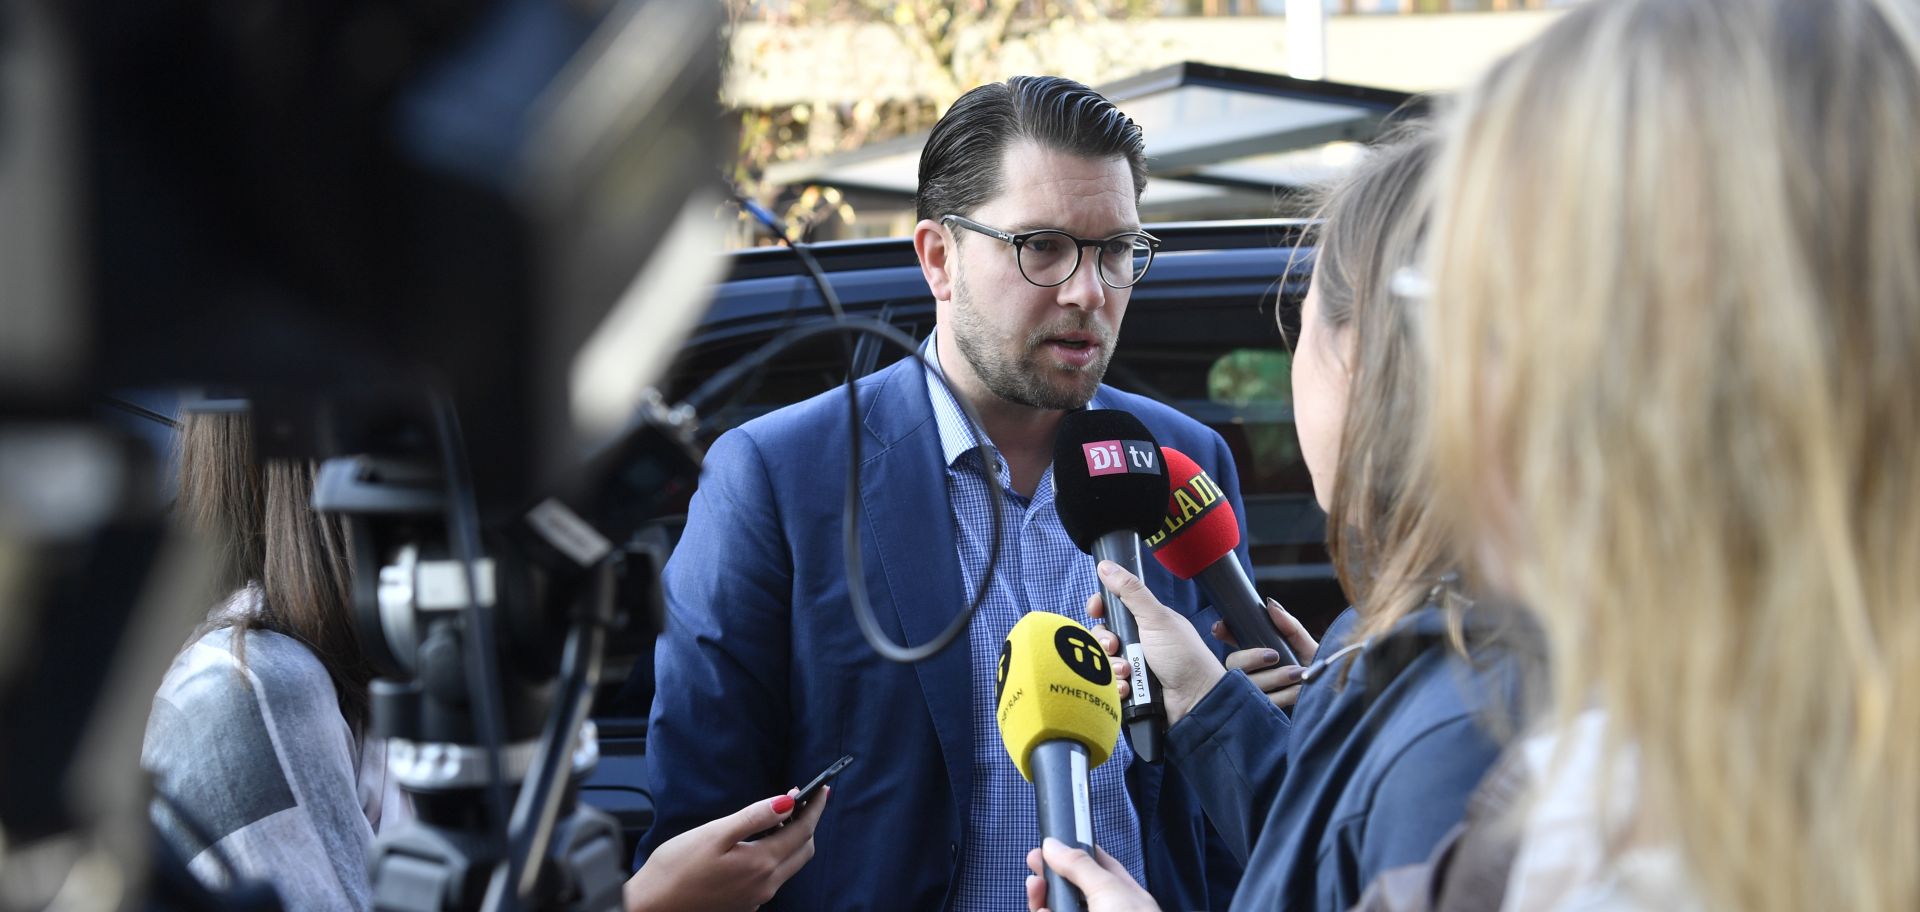 epa07009789 Sweden Democrats (SD, Sverigedemokraterna) party leader Jimmie Akesson (C) speaks to members of the media as he arrives to the TV-channel TV4, the morning after the general election in the country, in Stockholm, Sweden, 10 September 2018. The SD has won about 18 percent of the vote, media reported.  EPA/HENRIK MONTGOMERY  SWEDEN OUT